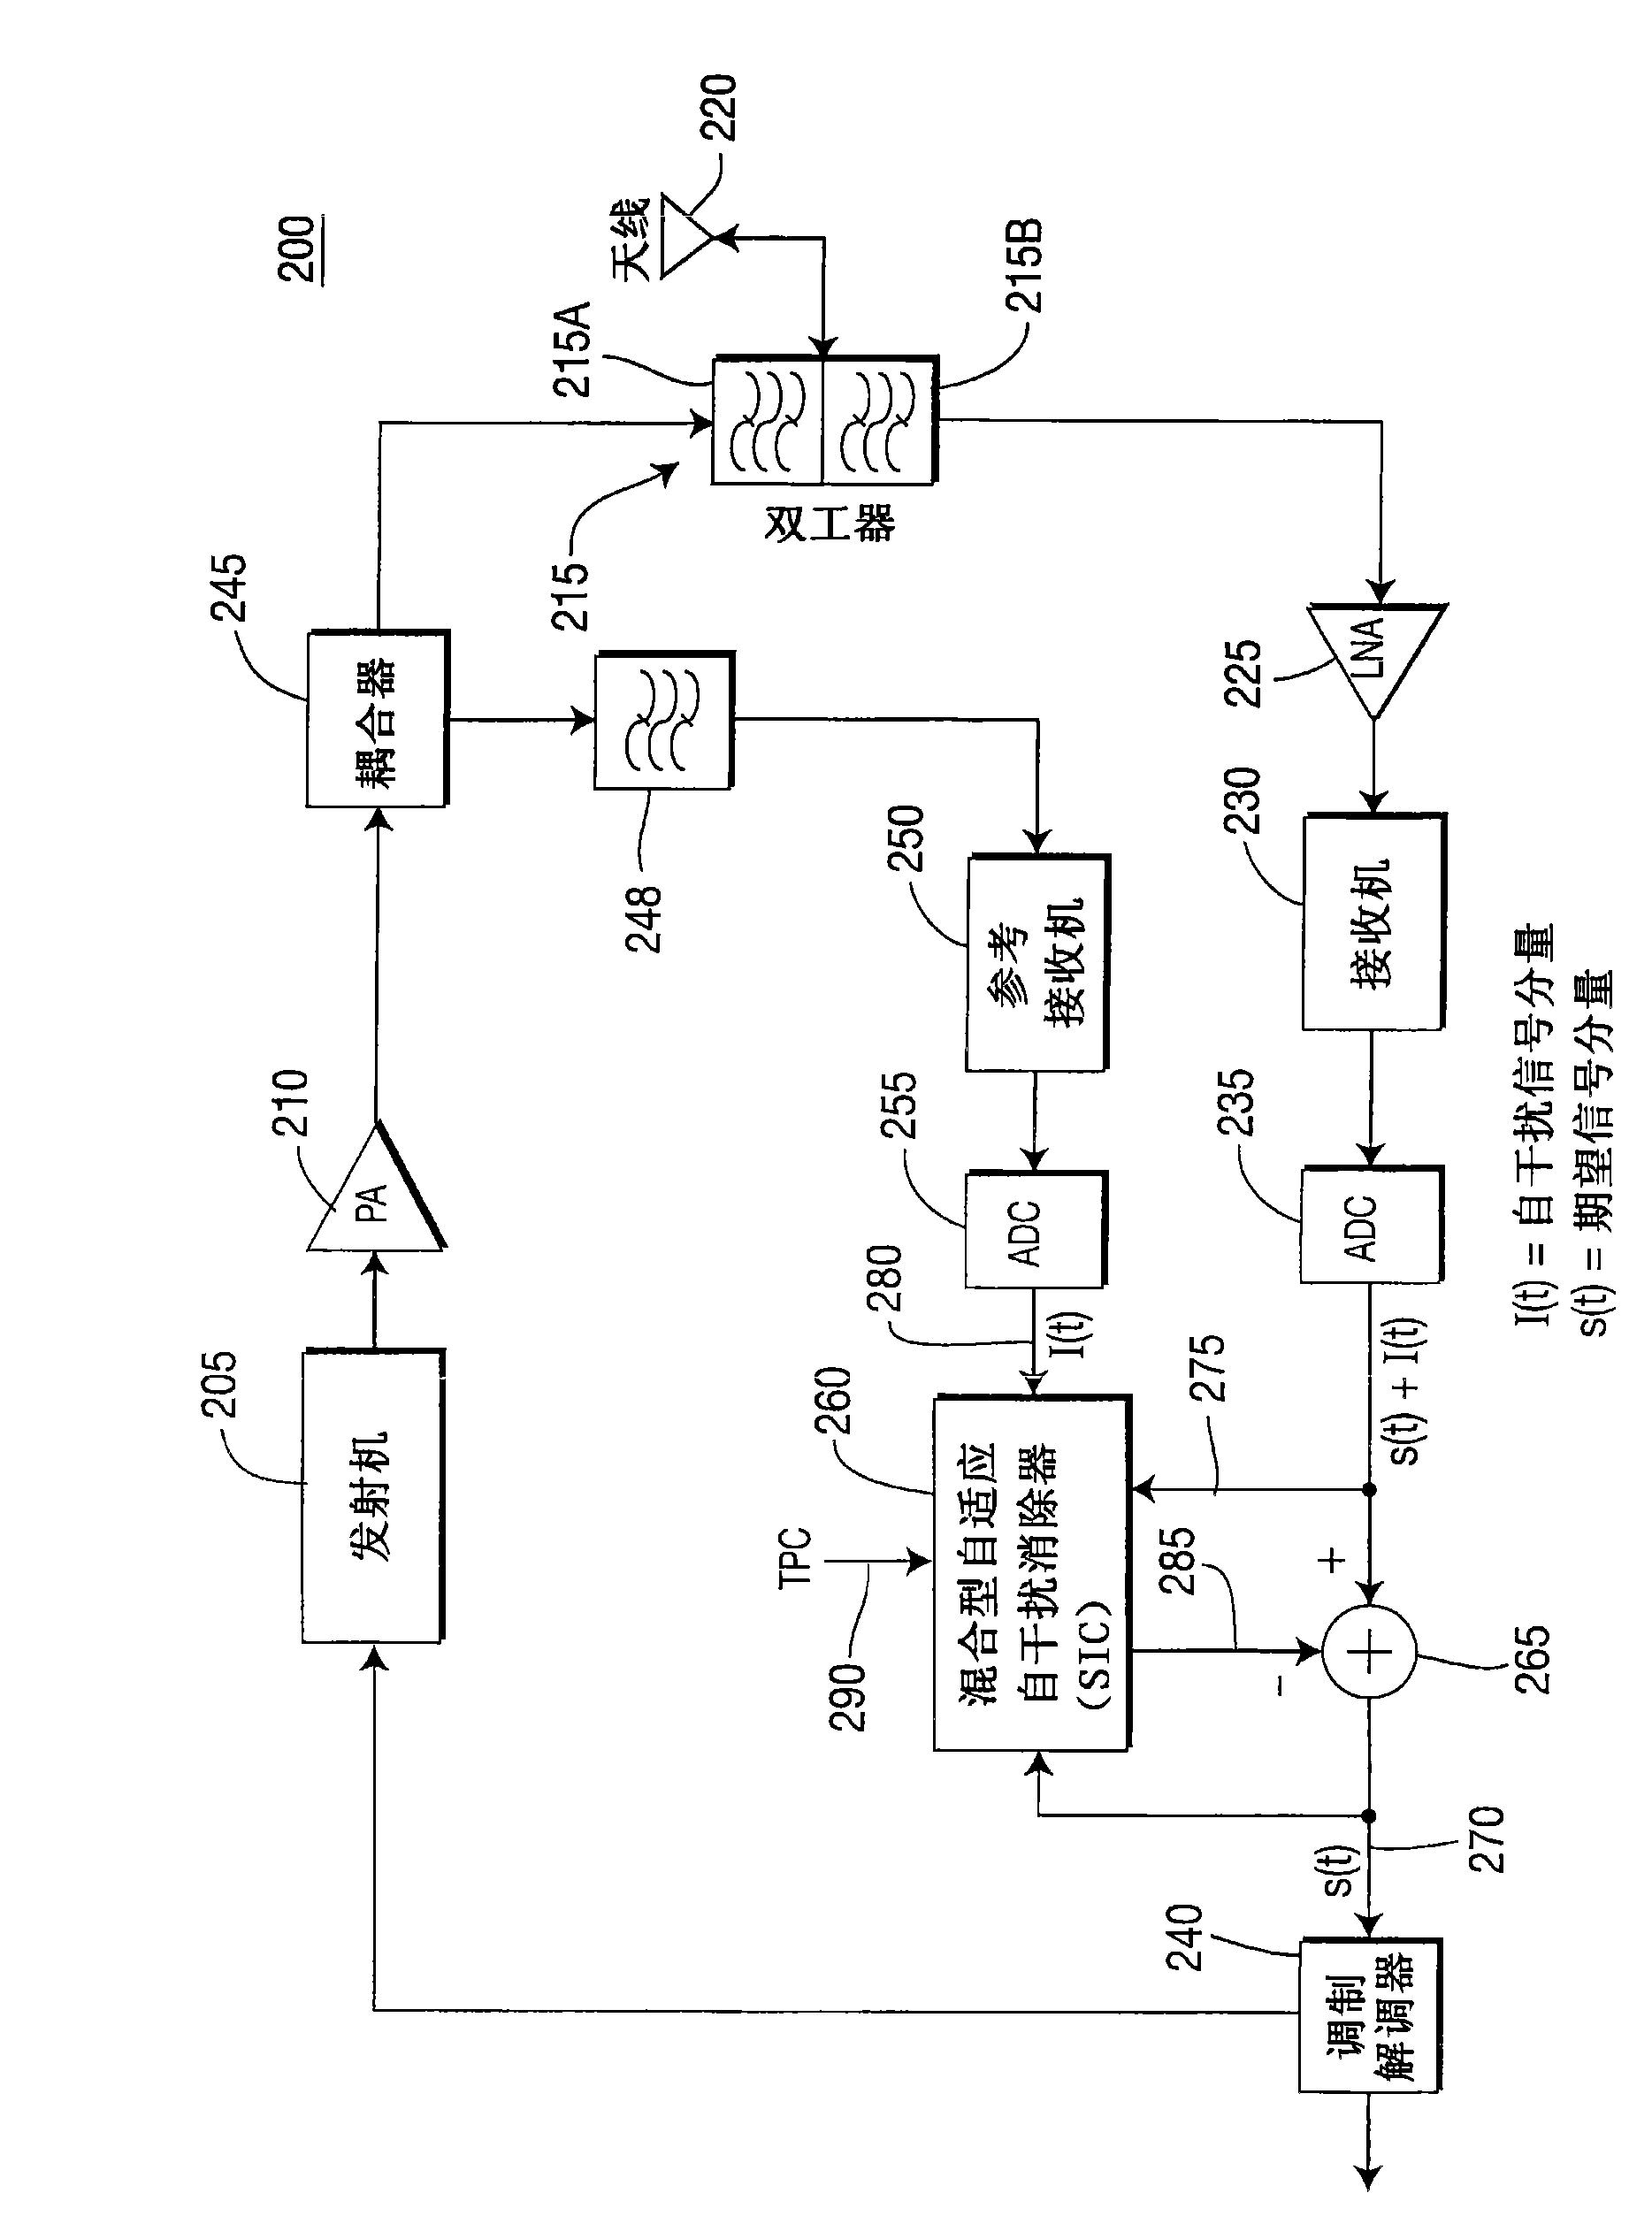 Transceiver with hybrid adaptive interference canceller for removing transmitter generated noise